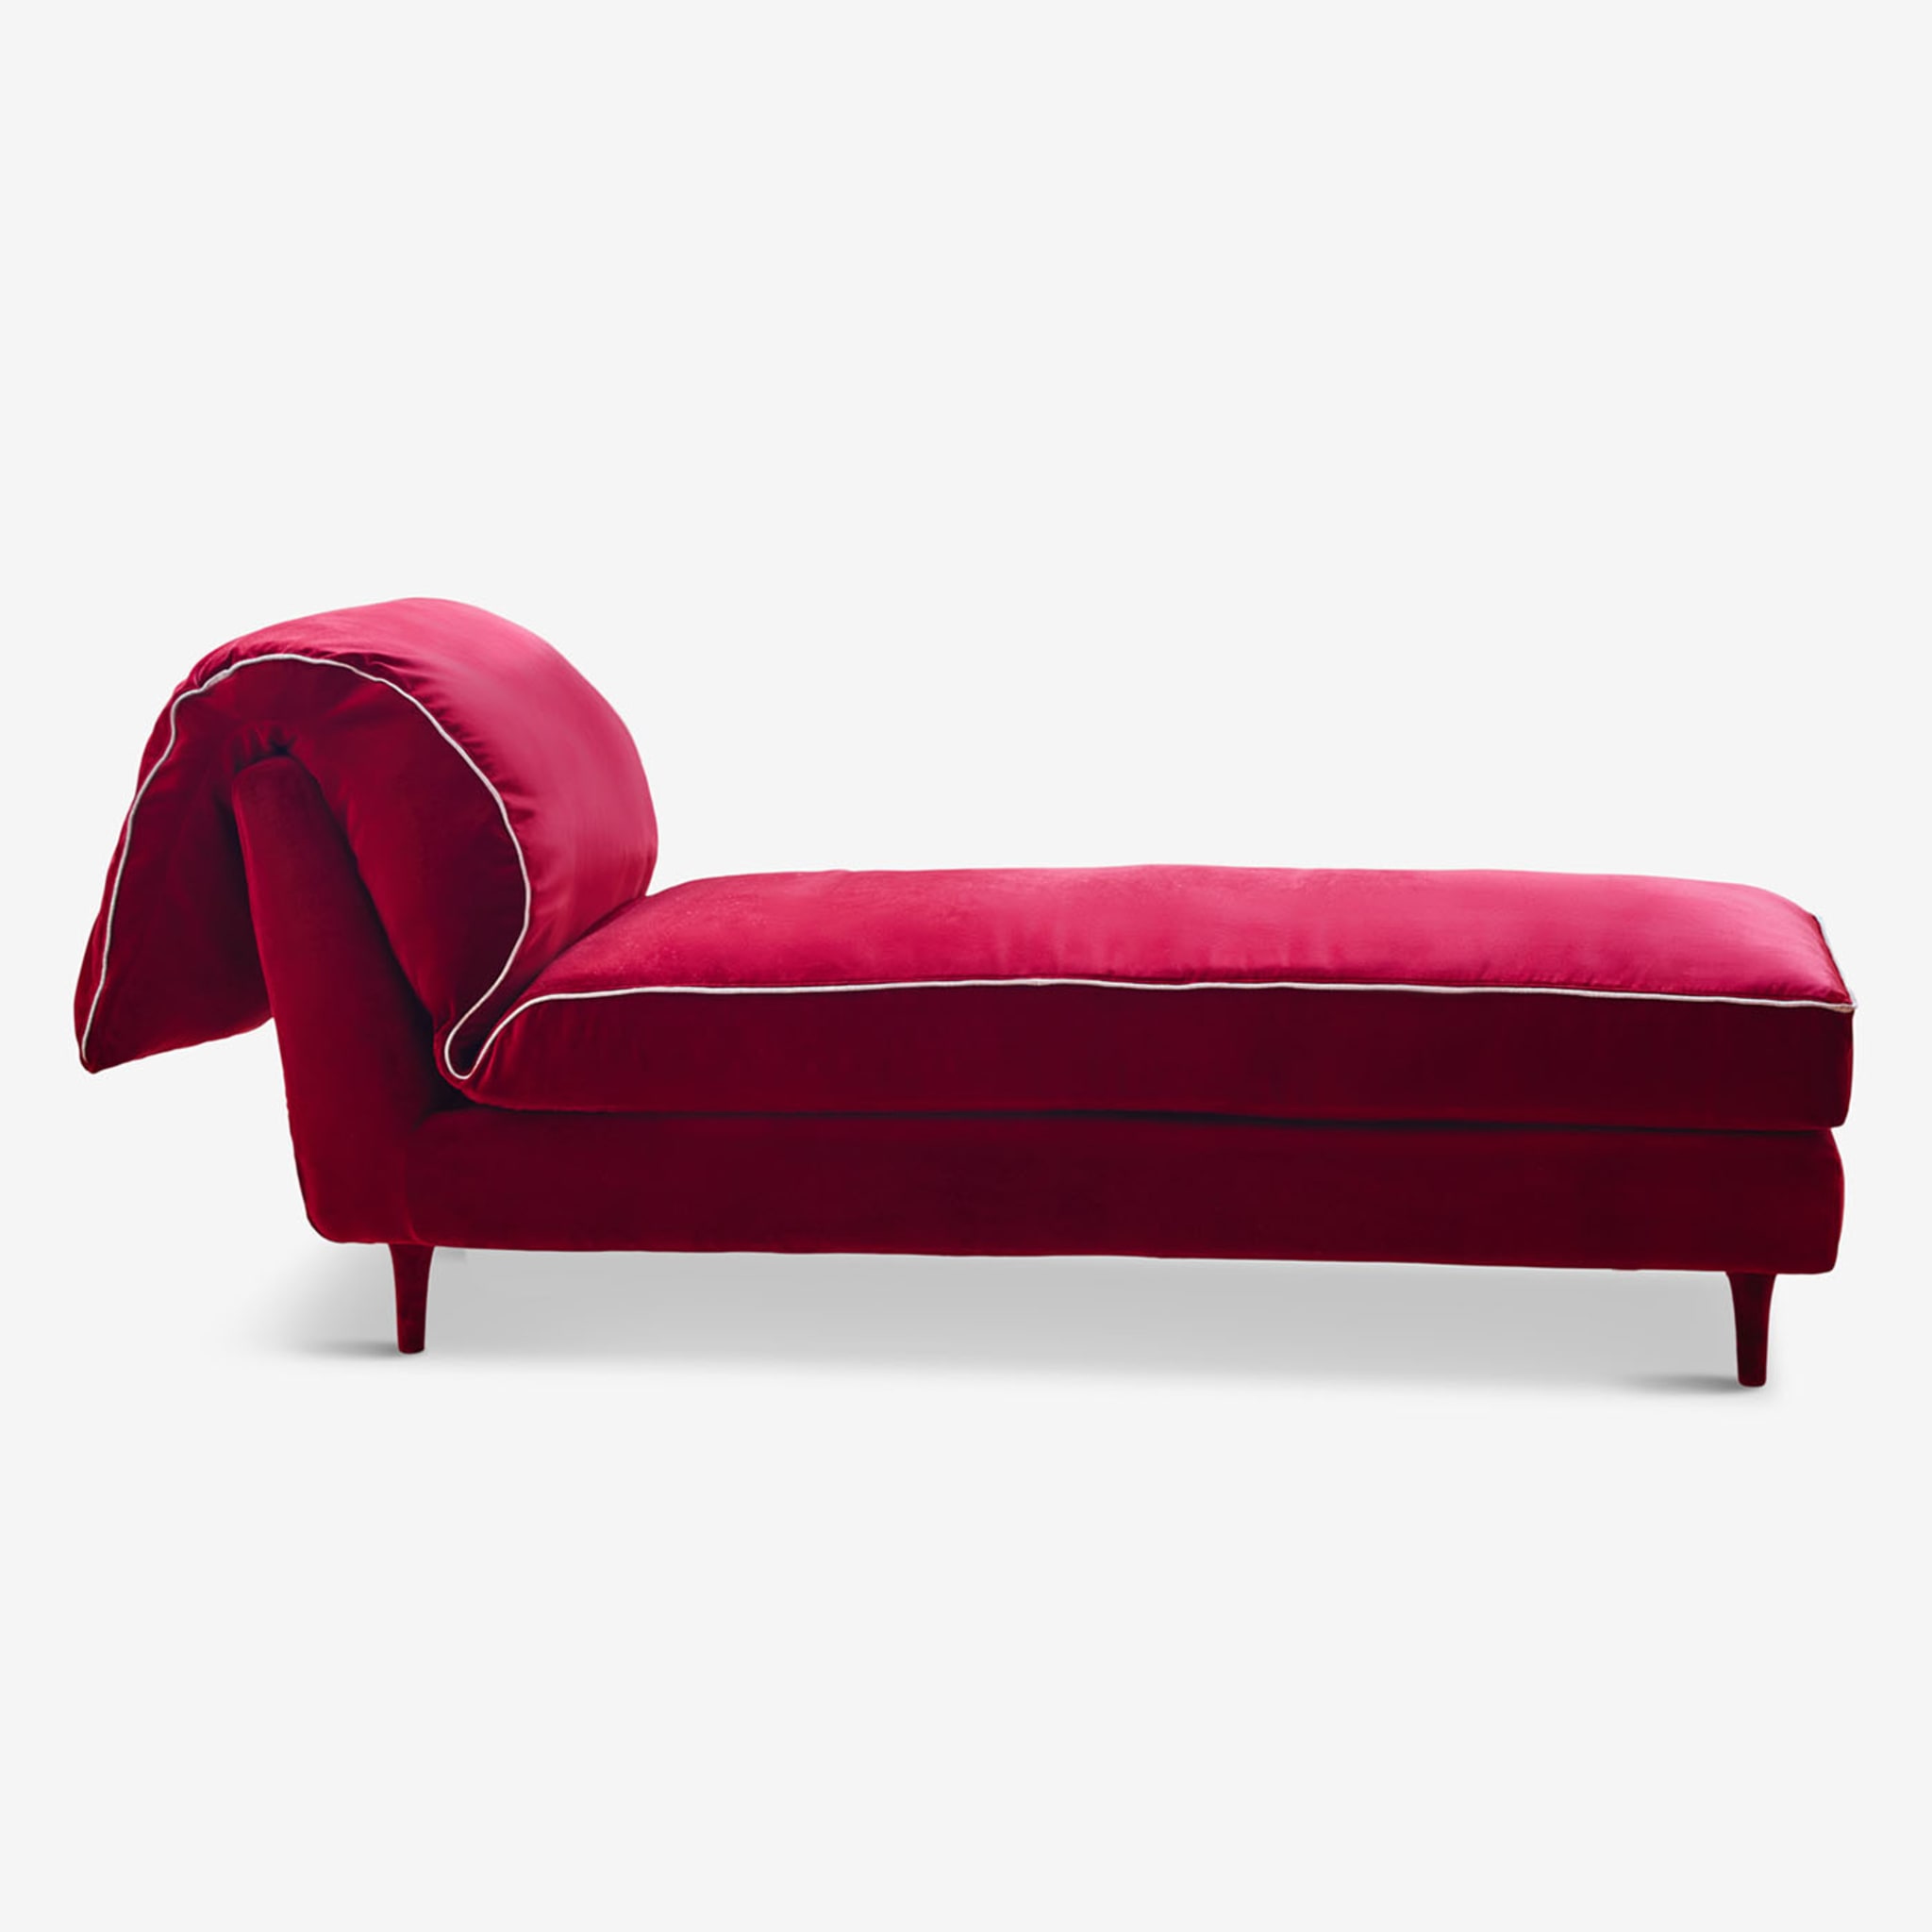 Casquet Red Passion Velvet Daybed - Alternative view 2